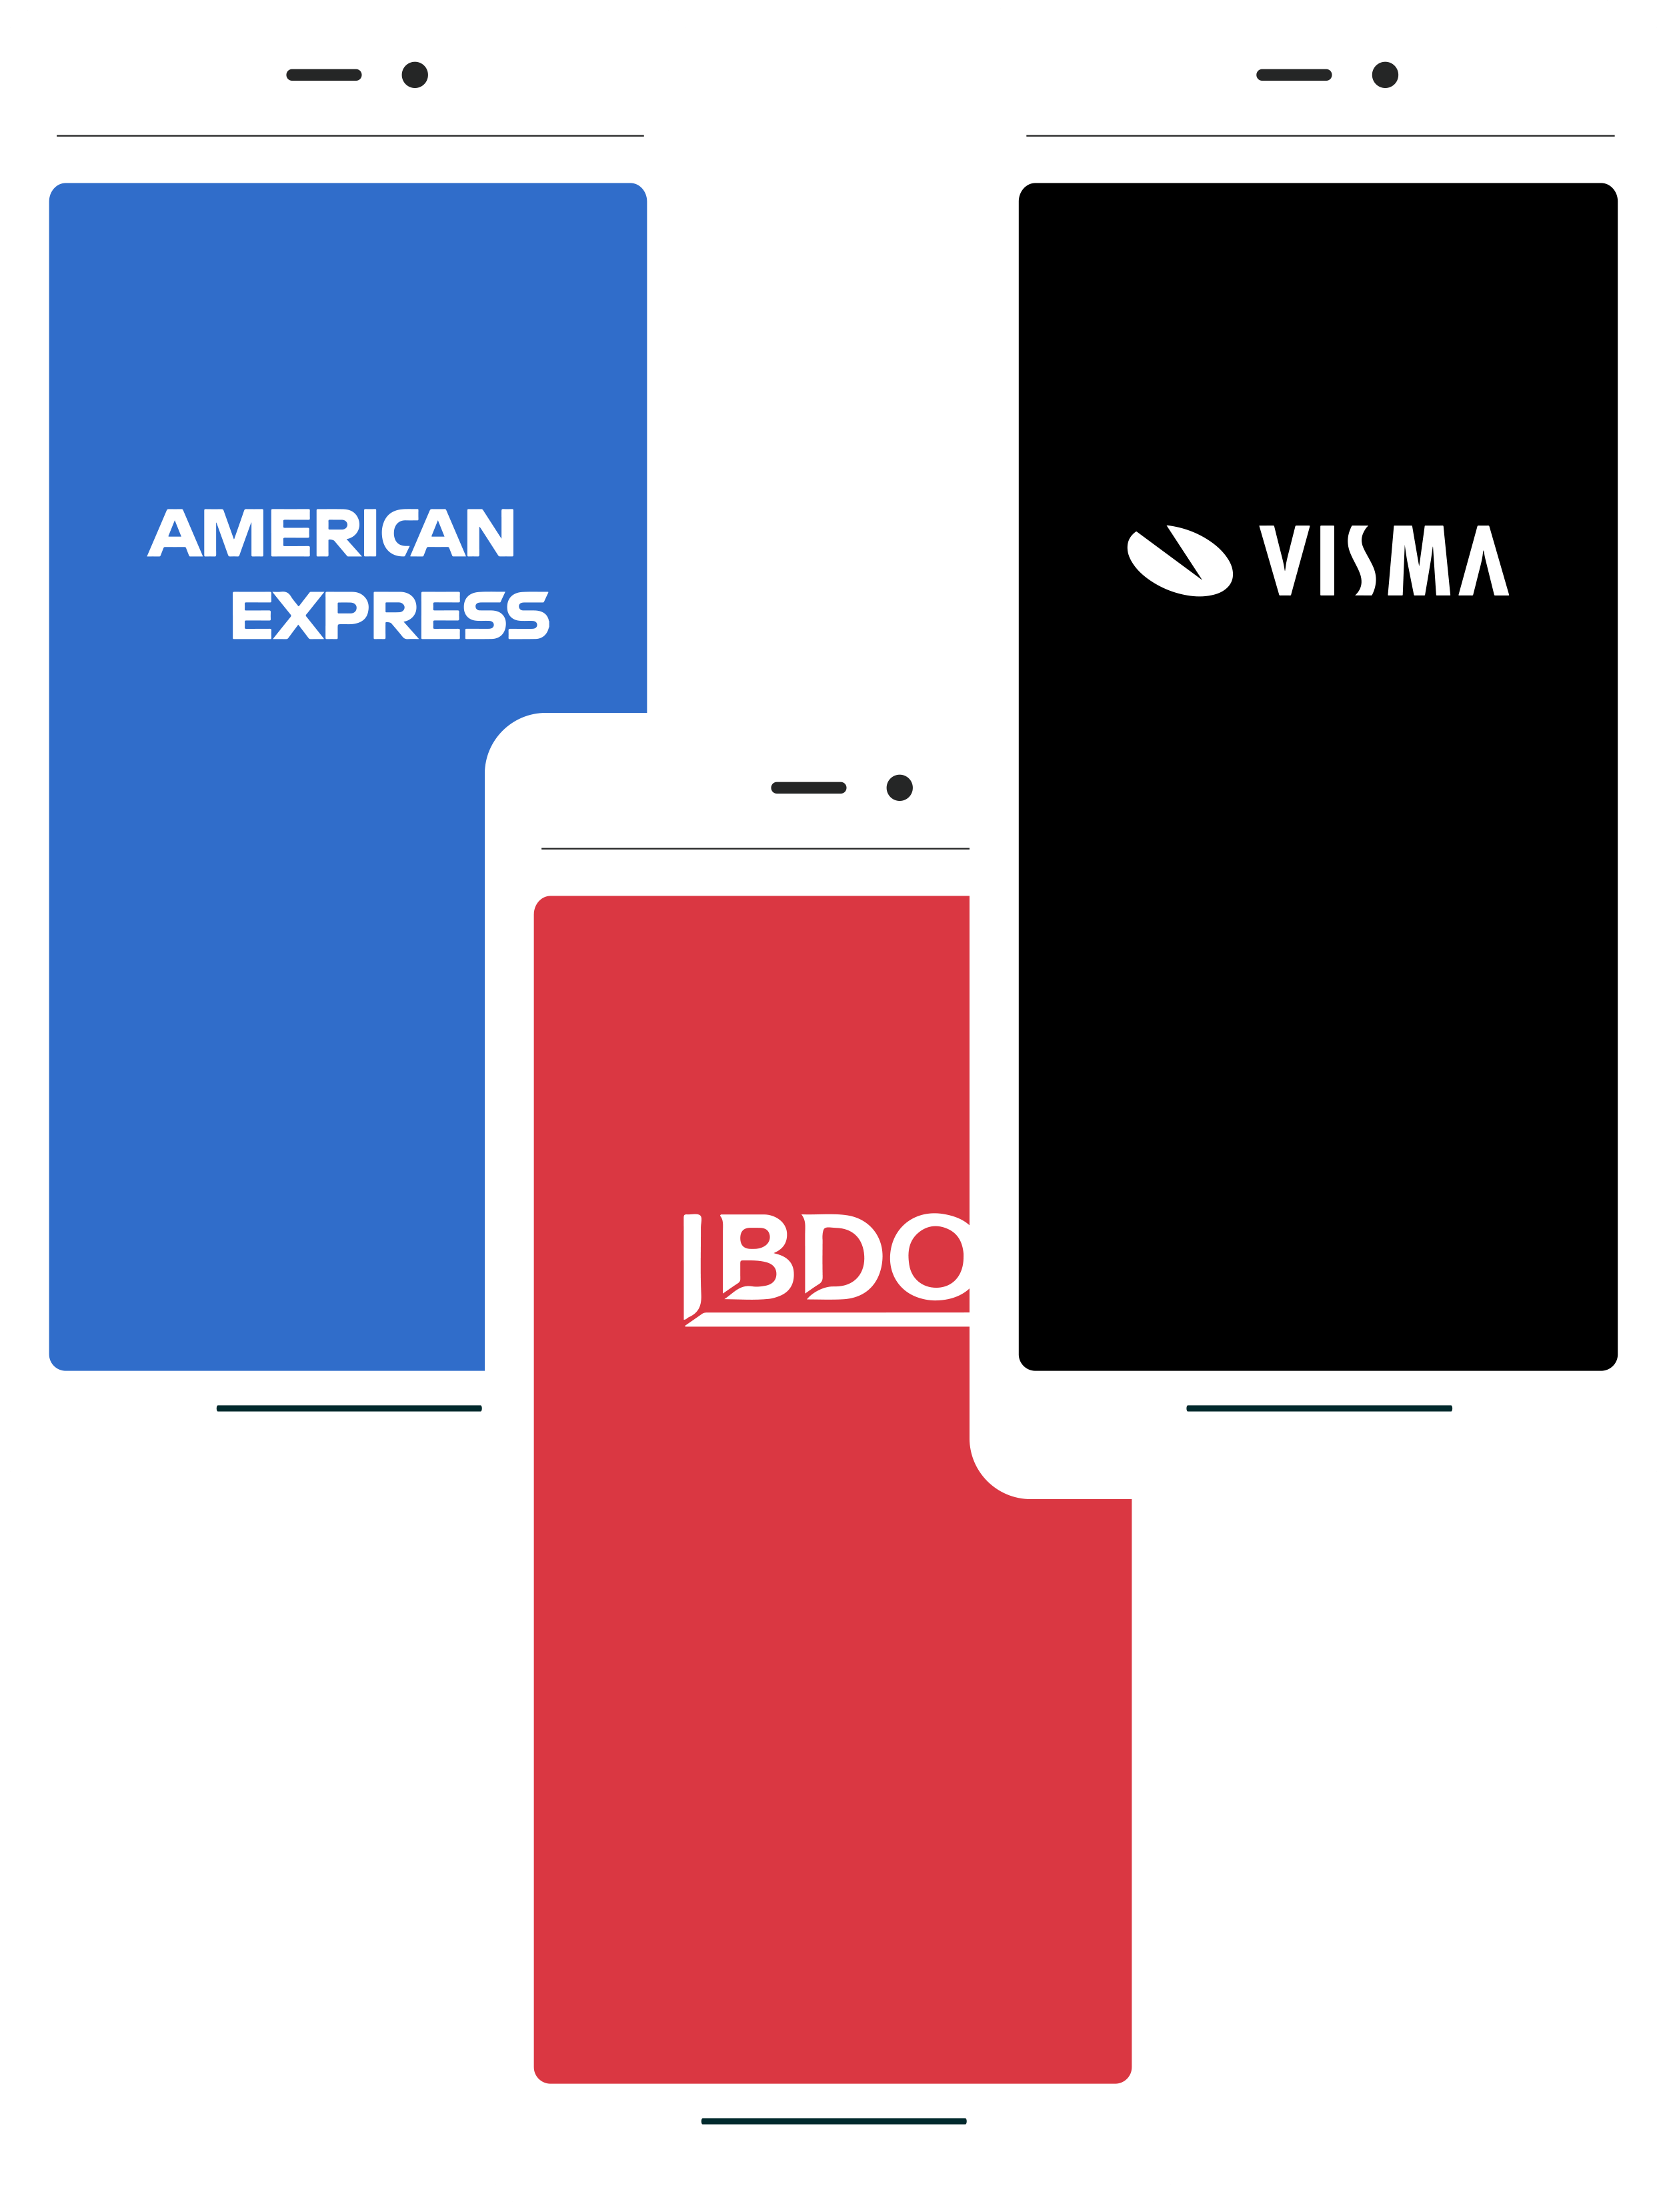 White label expense management. Our tech, your brand.